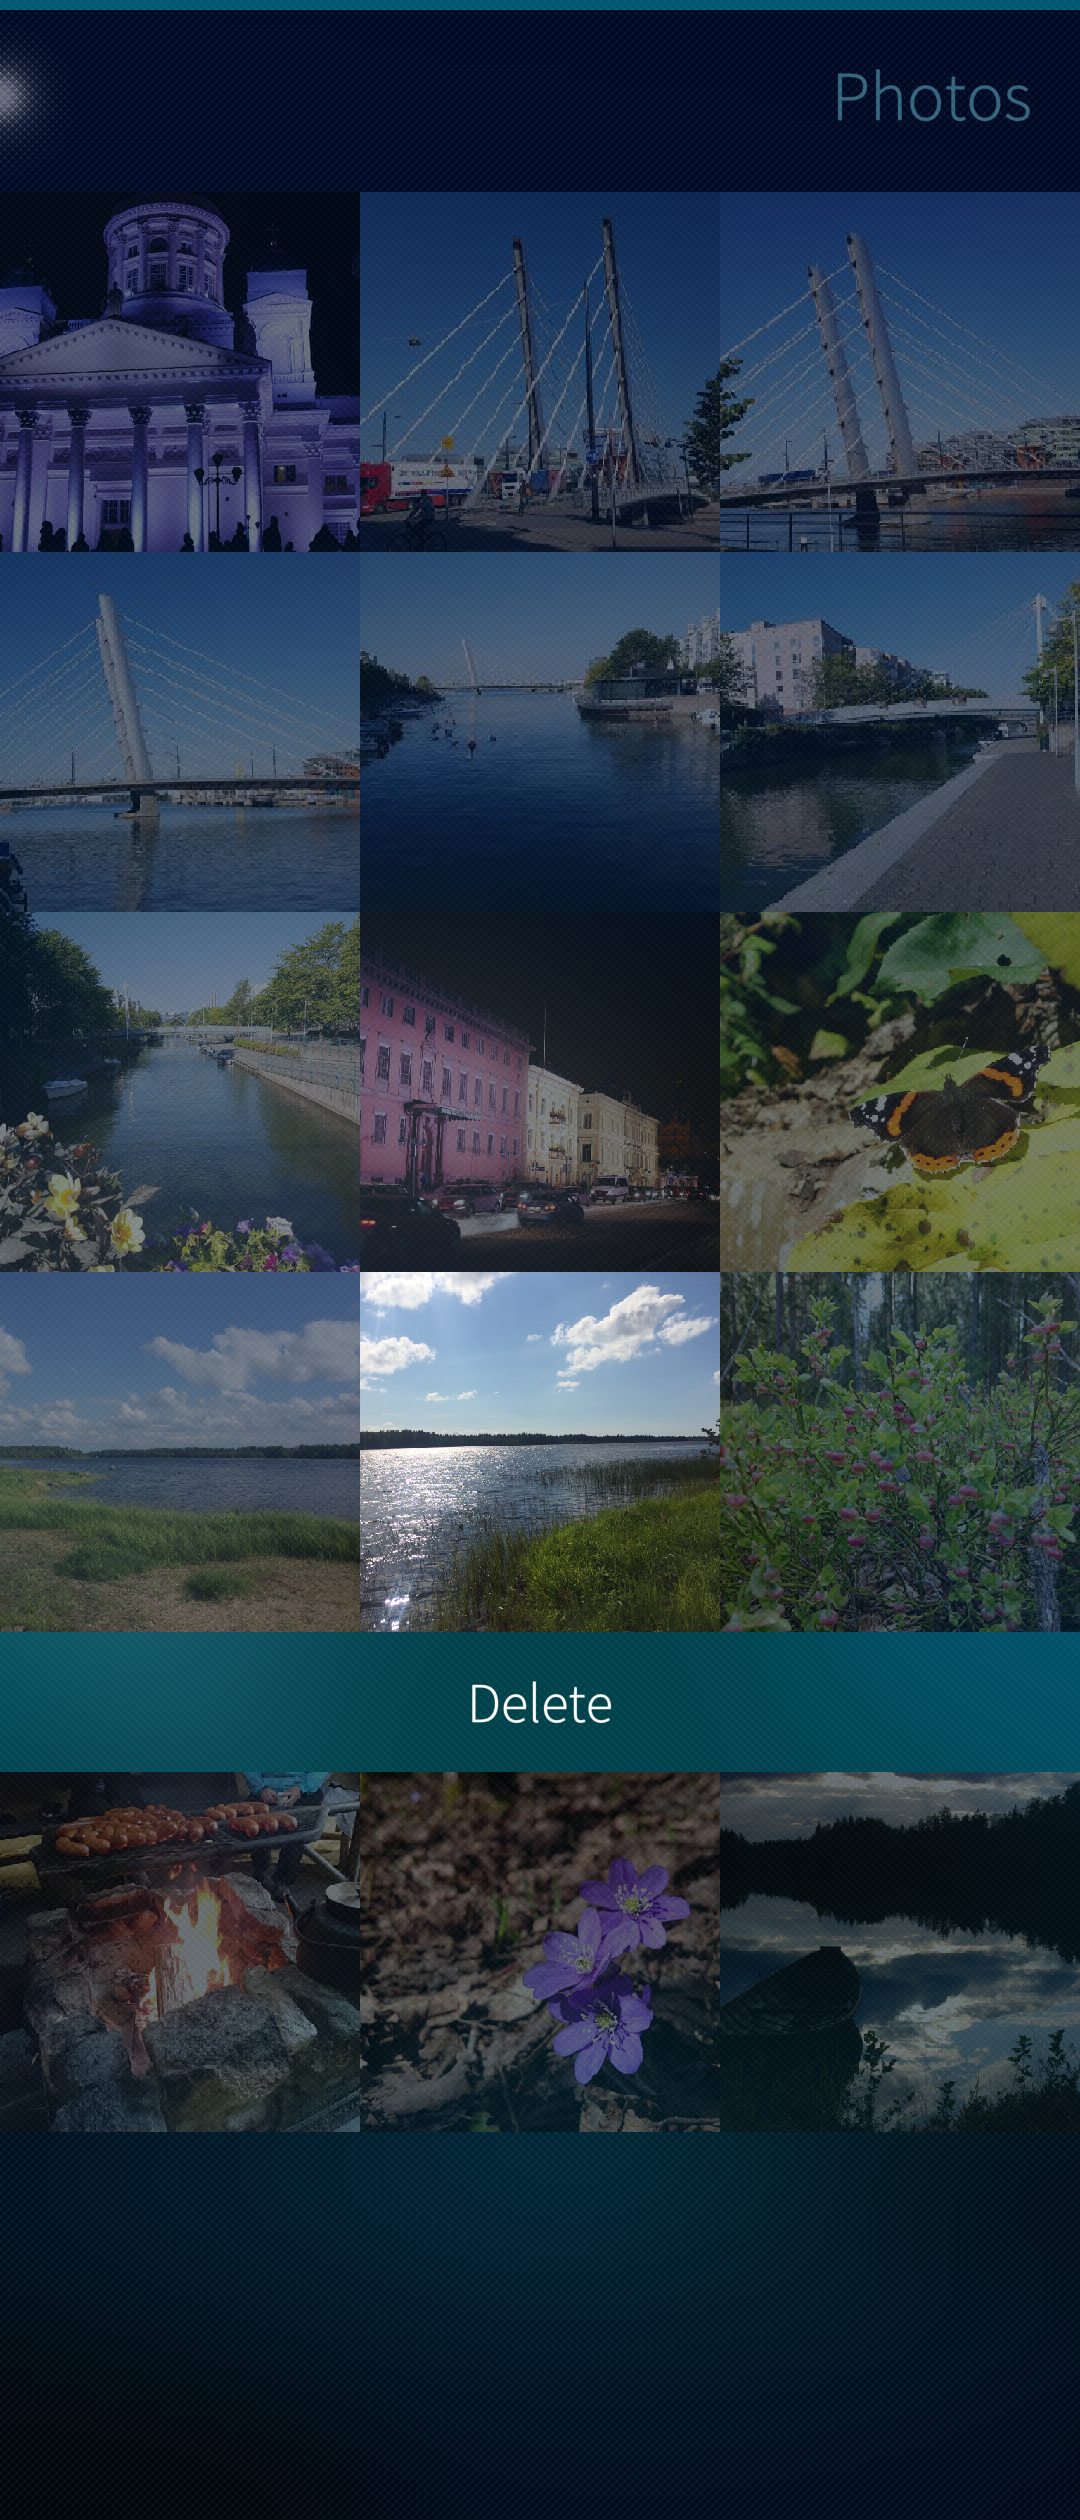 Deleting a photo